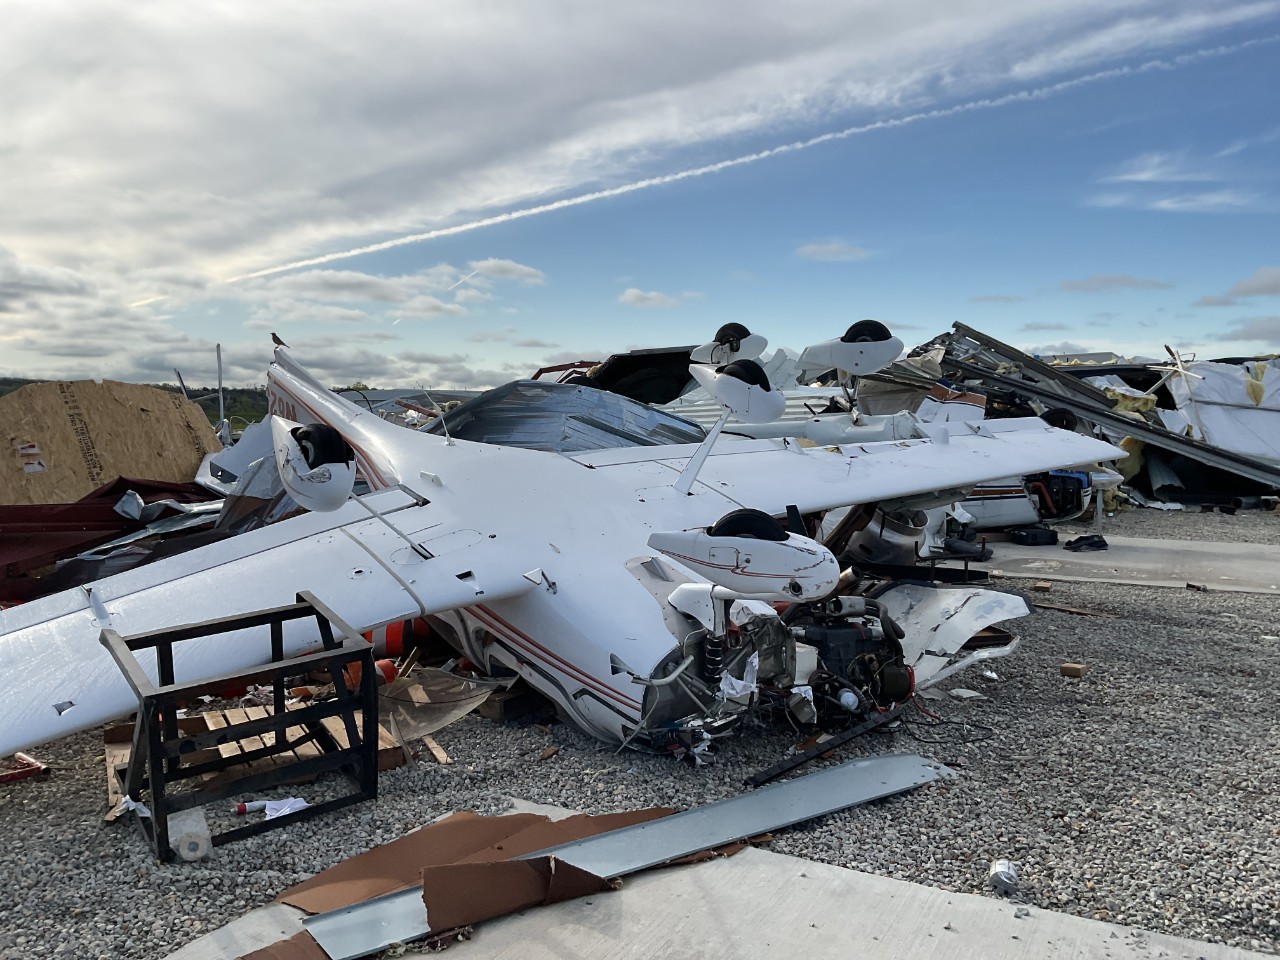 wrecked airplane from storm damage